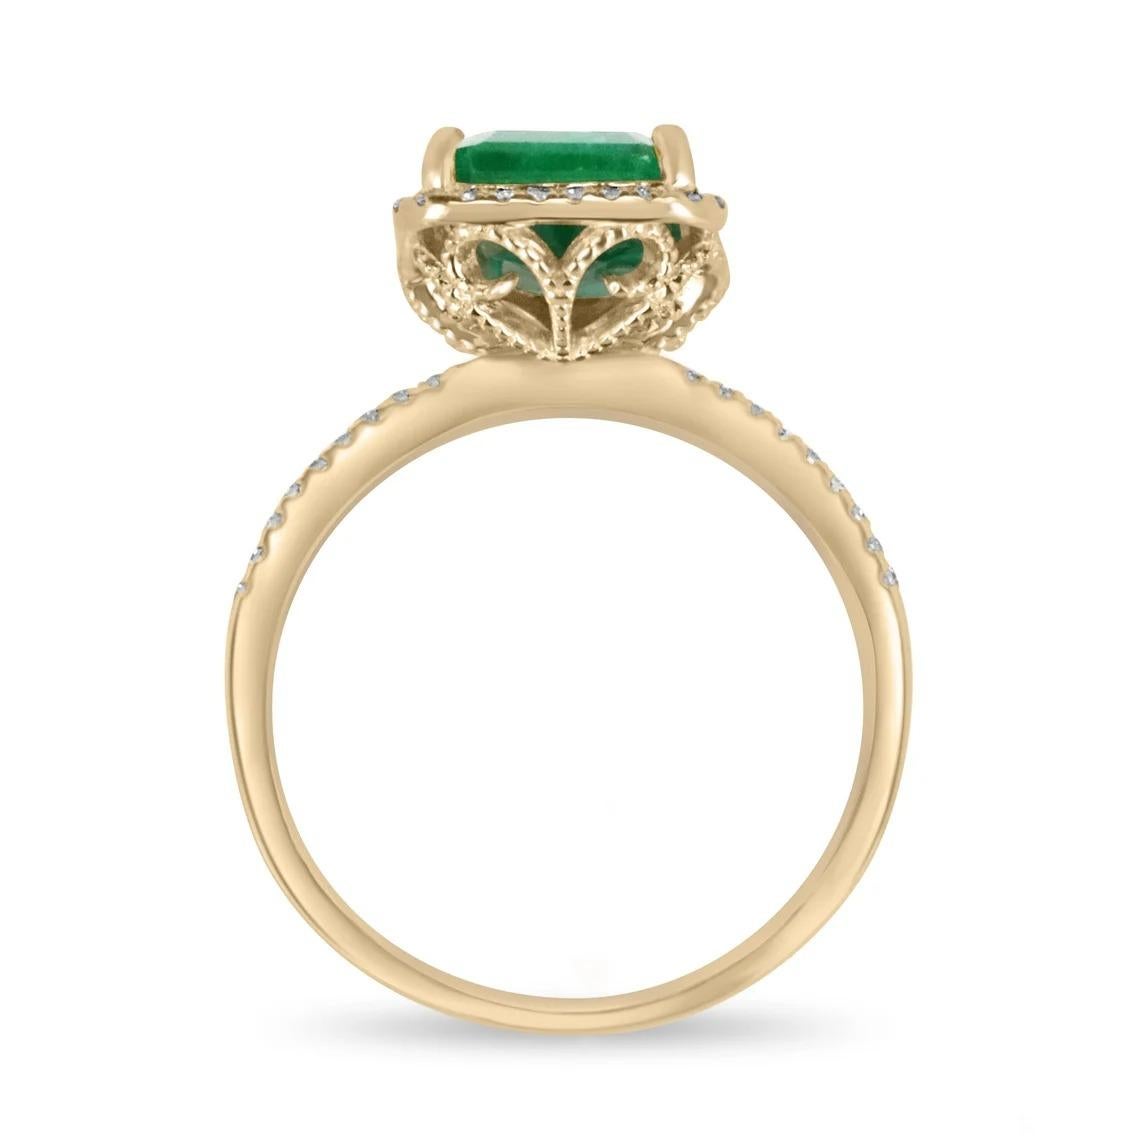 Behold the most gorgeous emerald and diamond engagement/right-hand ring! This beauty features a remarkable 2.70-carat, Natural emerald cut emerald from the mines of Zambia. The fine-quality gemstone showcases a vivacious, and rich dark green color